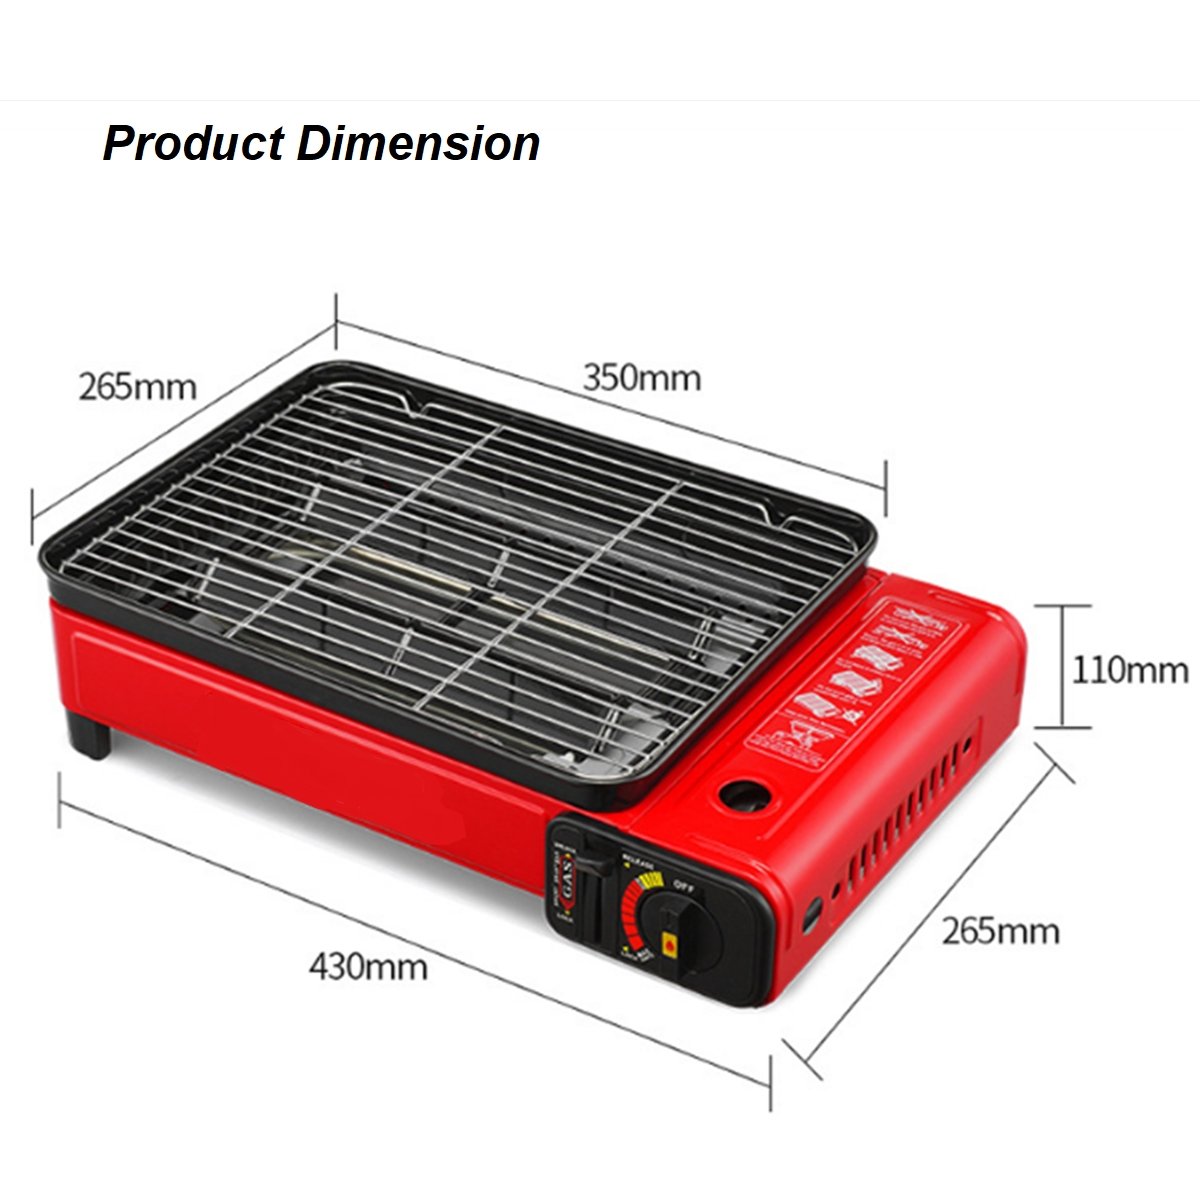 Portable Gas Stove Burner Bbq Camping Gas Cooker With Non Stick Plate Red With Fish Pan And Lid